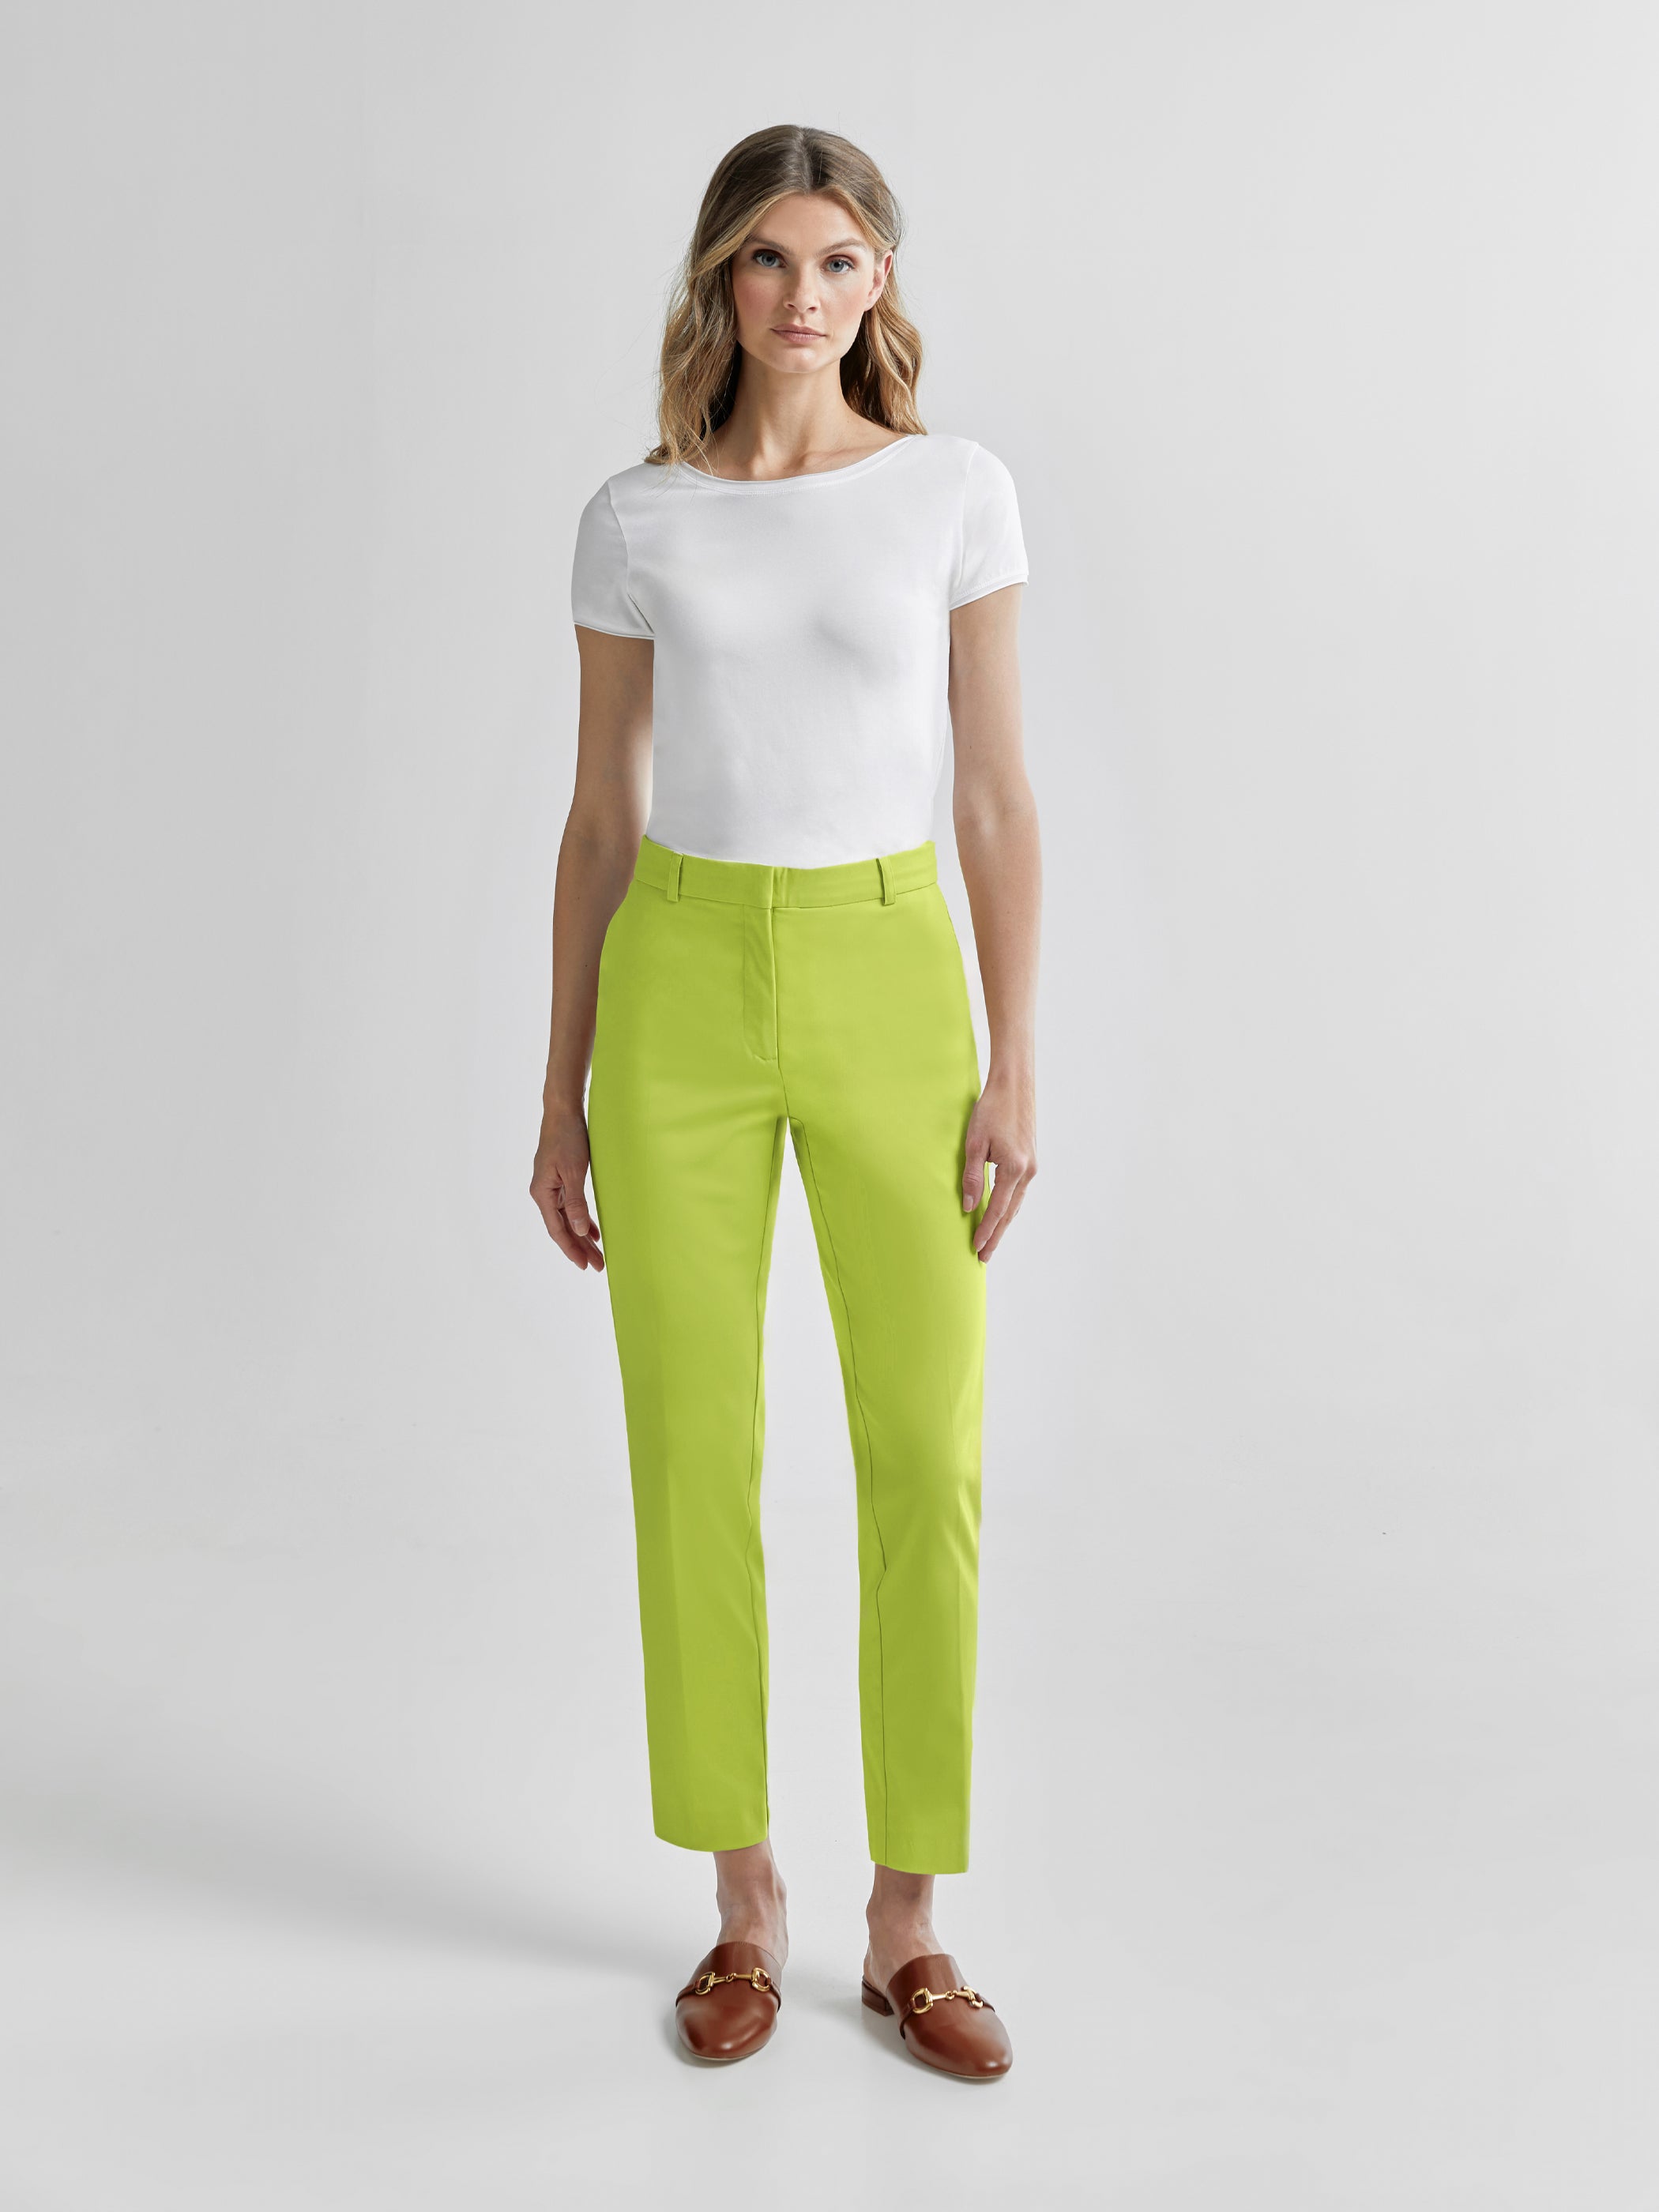 Issey Miyake A-POC lime green pants — Flower in the Mirror Vintage